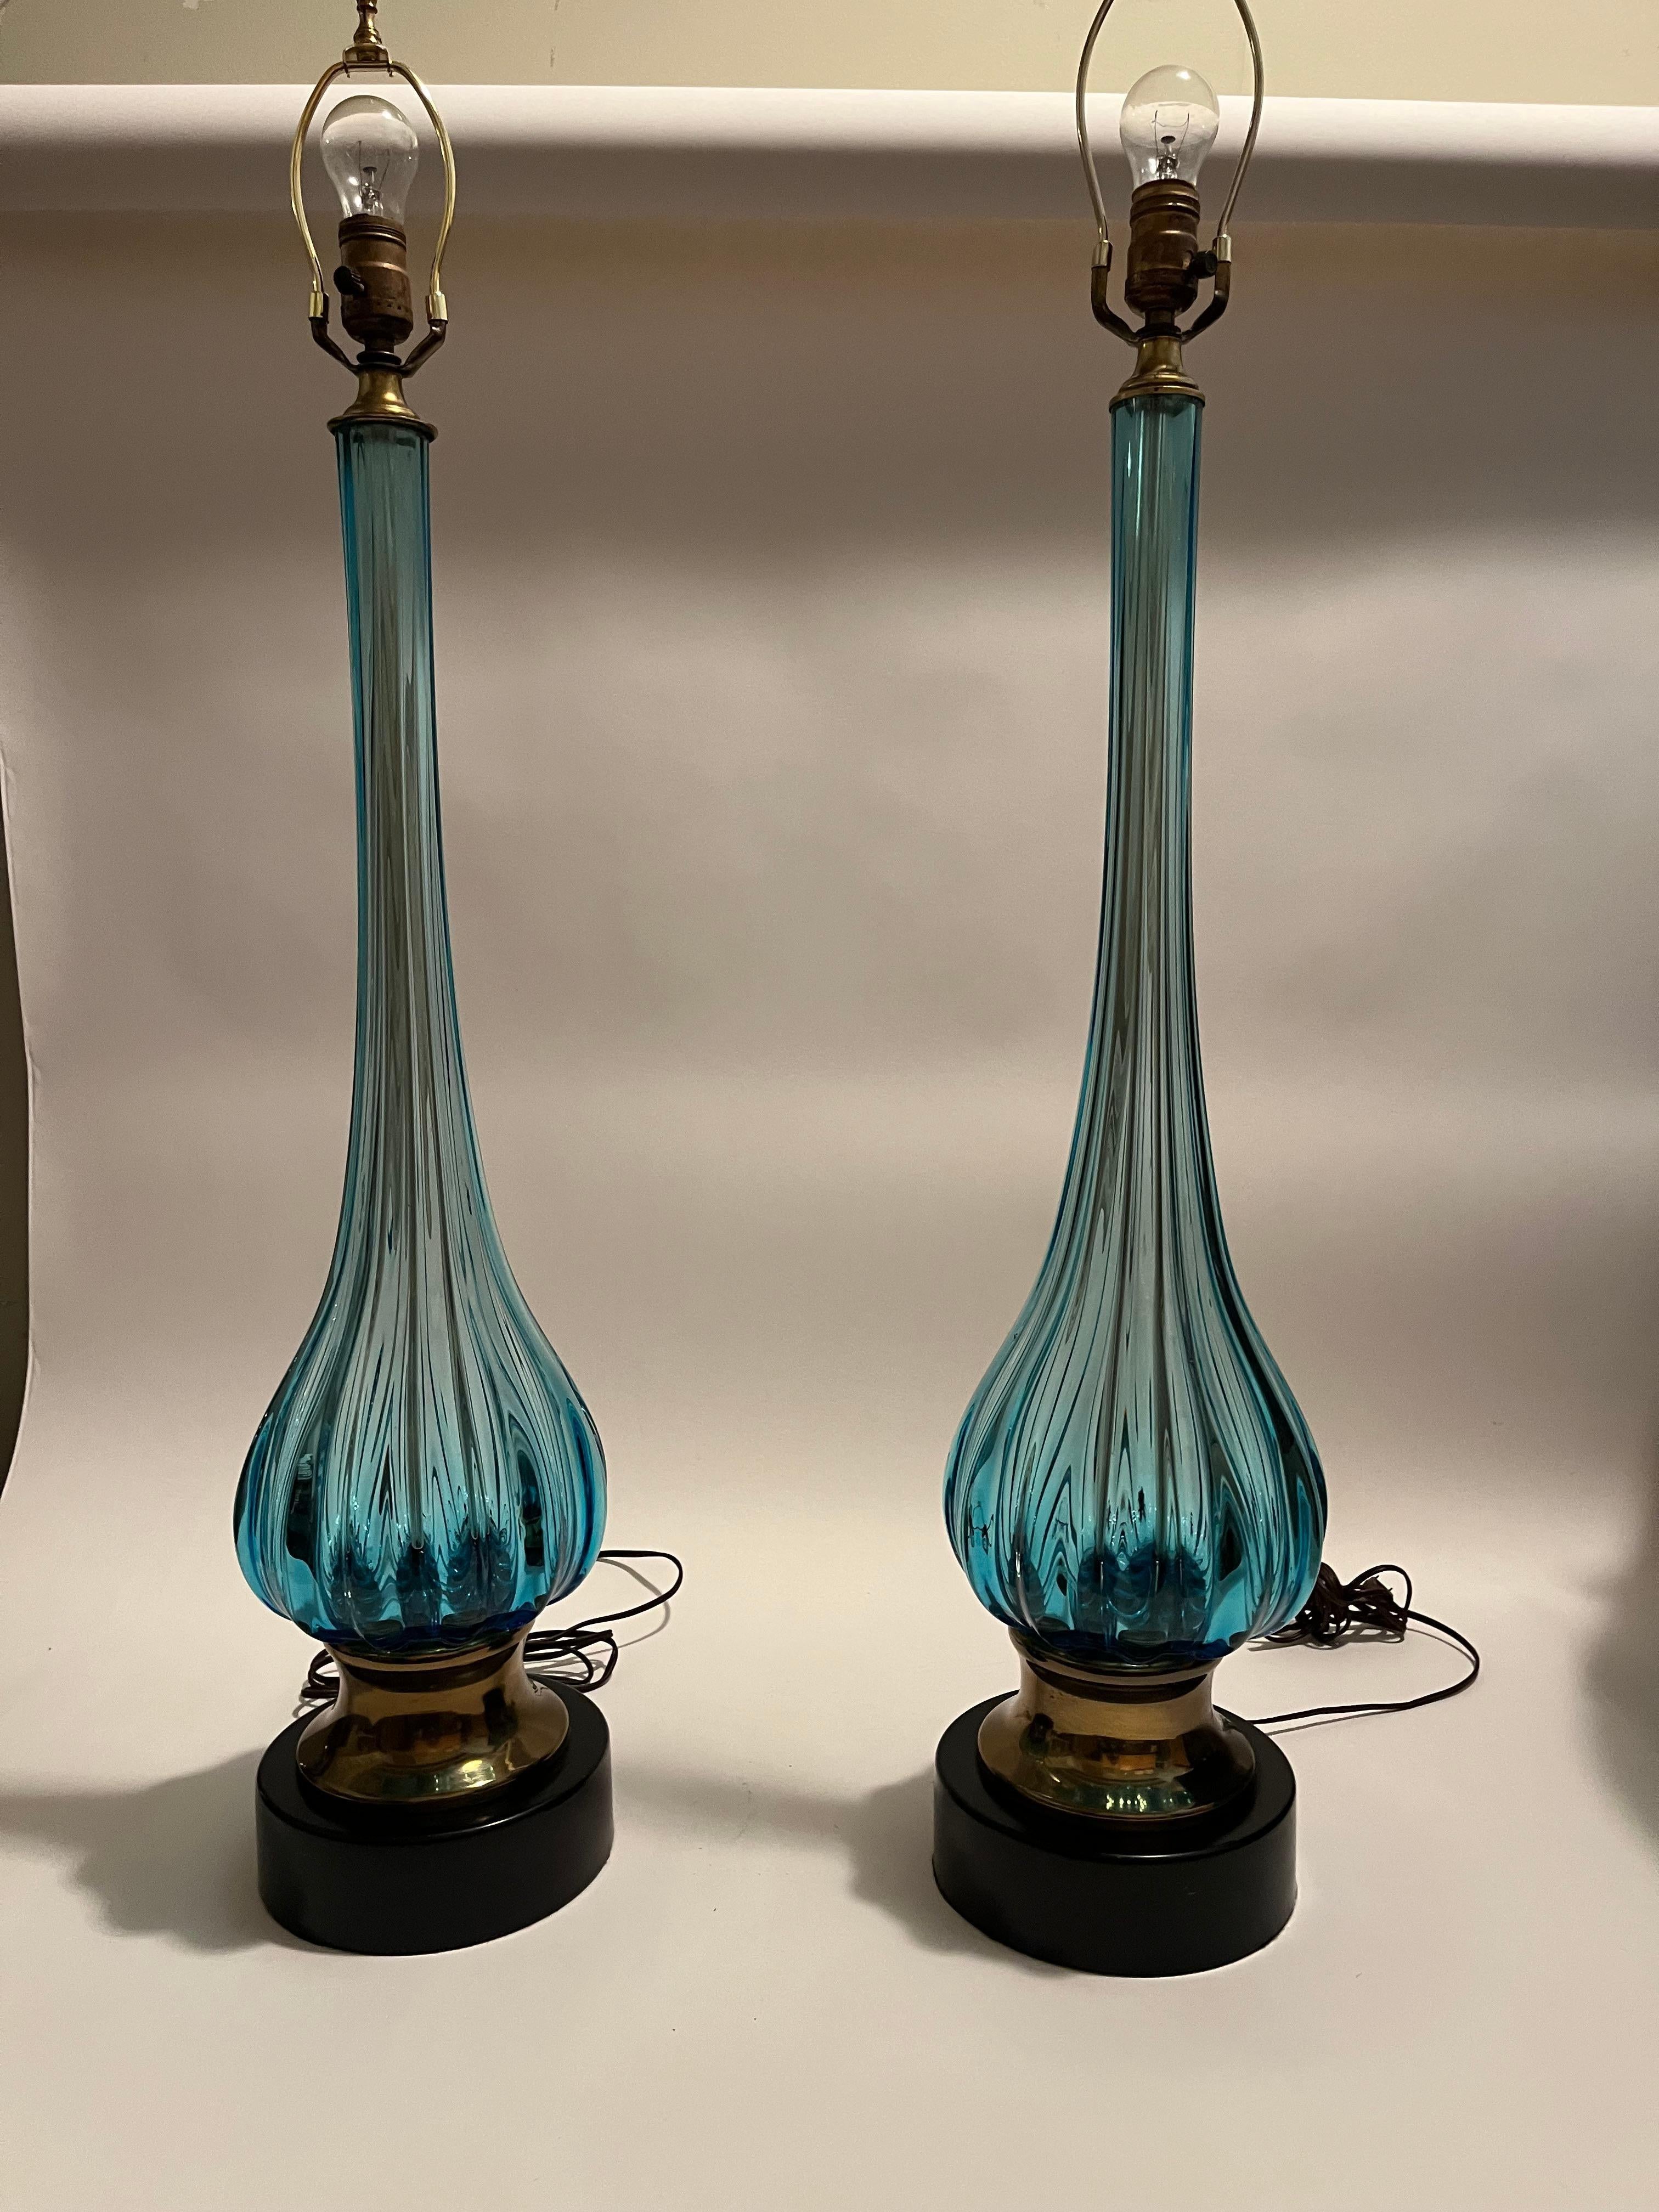 A pair of hand blown Murano ocean blue glass table lamps designed by Archimede Seguso and retailed by The Marbro Lamp Co. Manufactured in the early 1960s, the graceful lamps are set upon gold and black base characteristic of the Marbro Lamp Co.